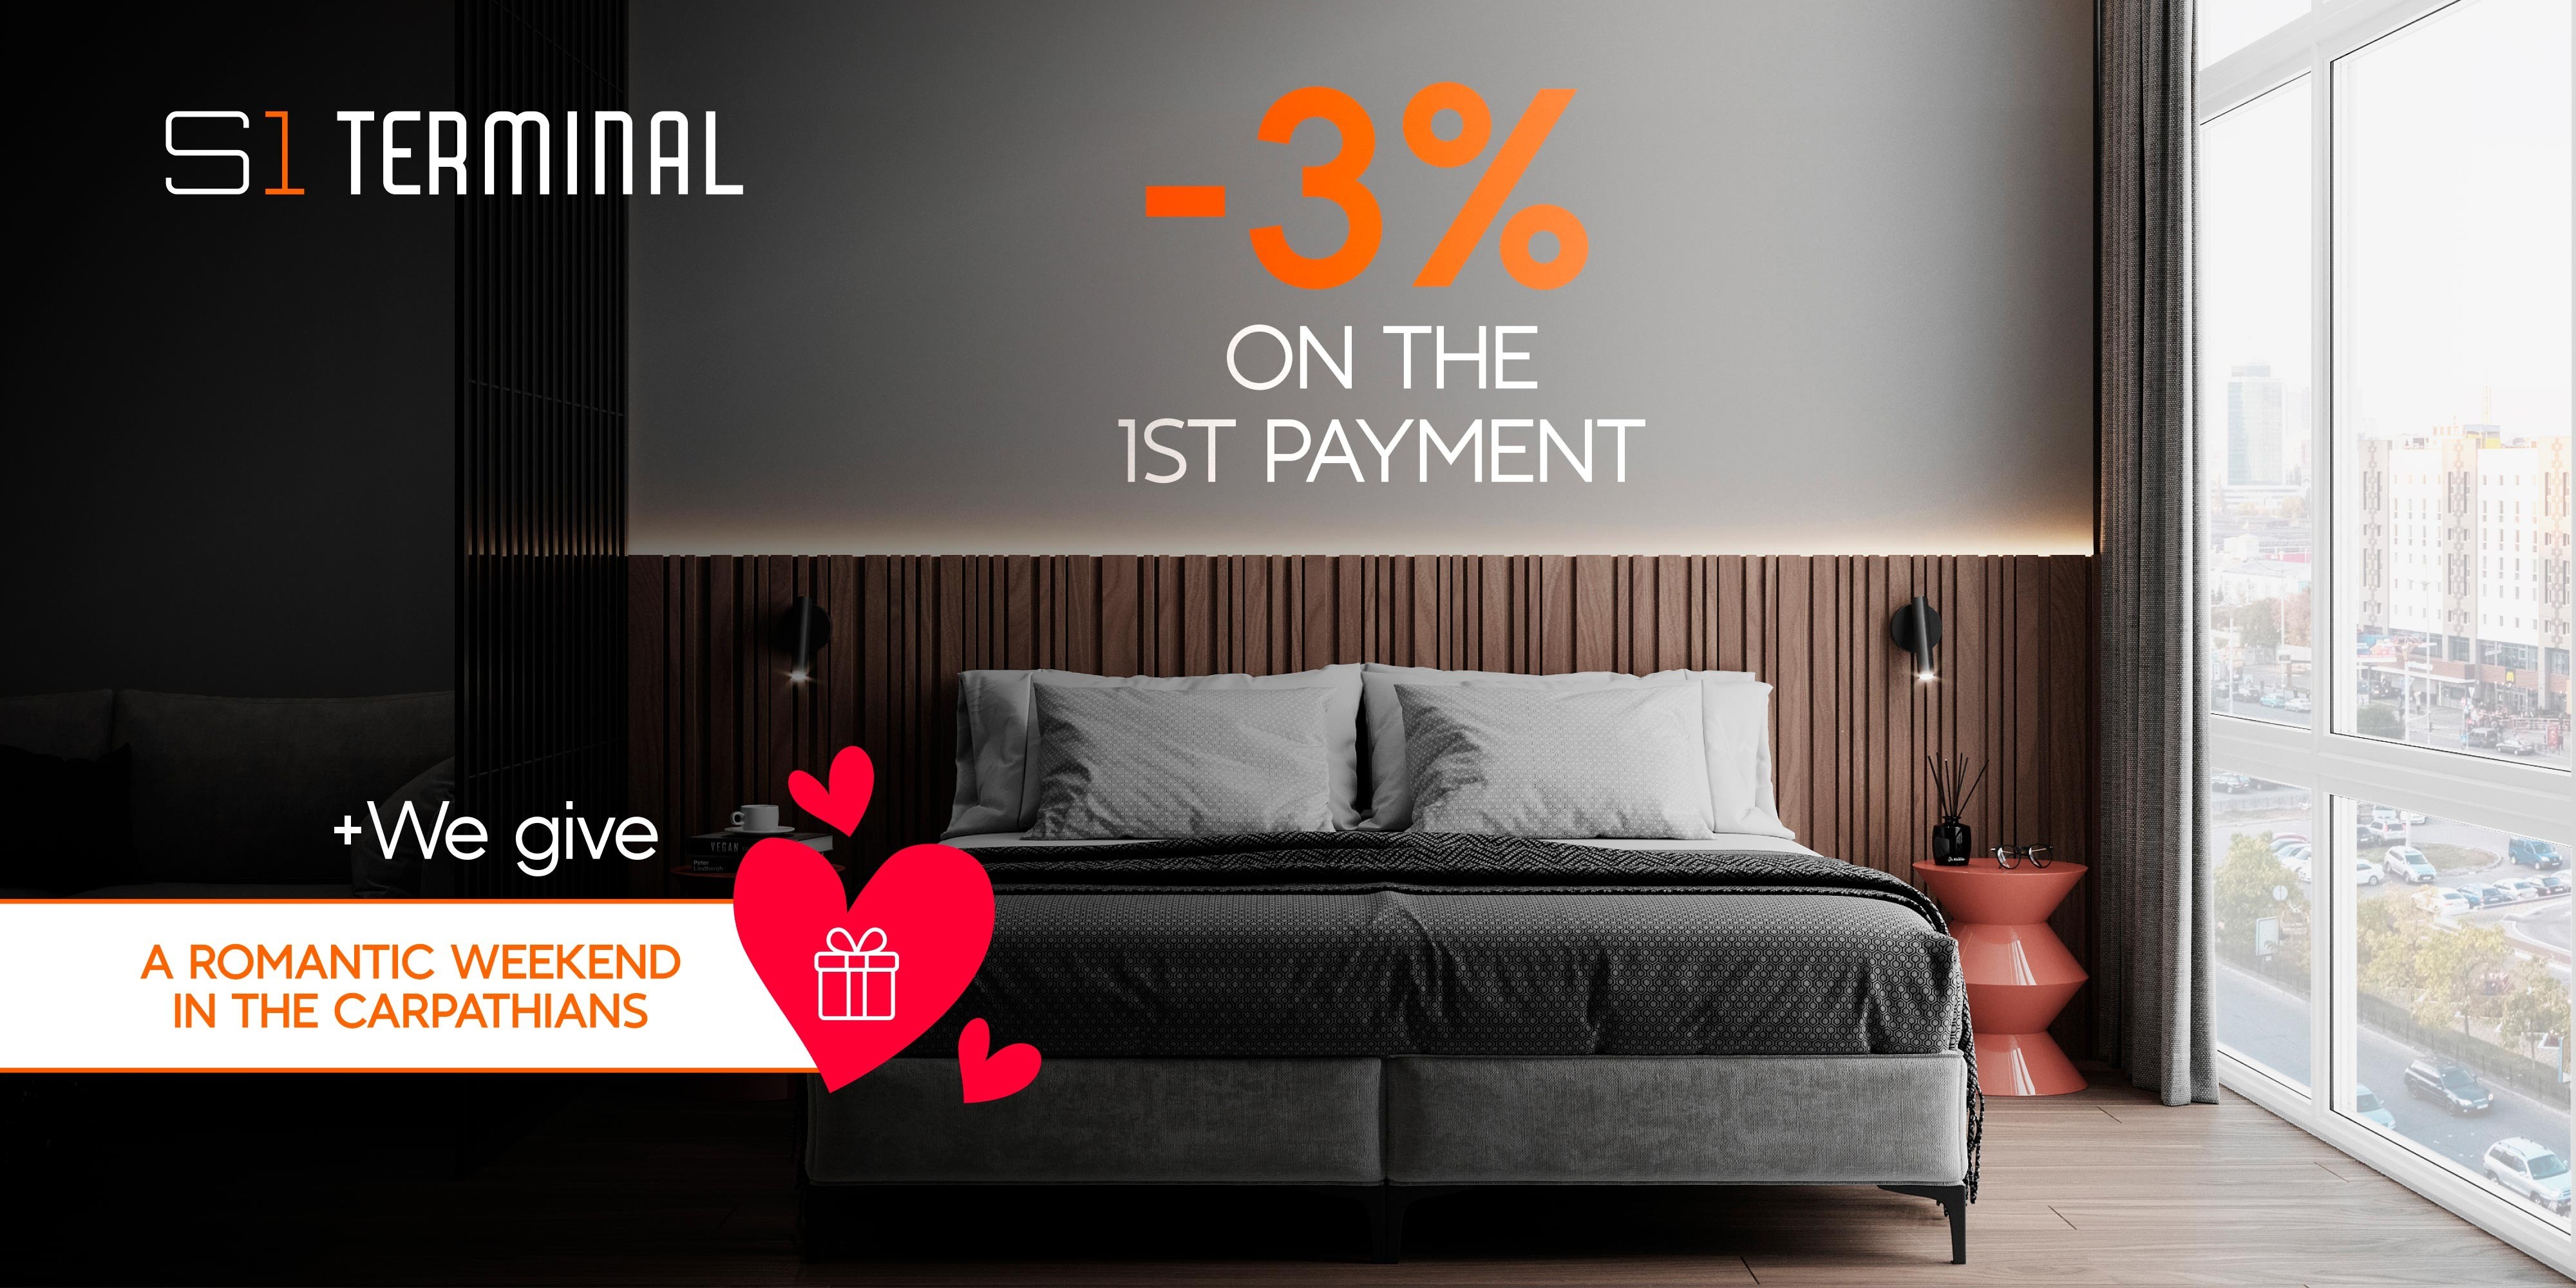 Special offer for Valentine's Day! S1 Terminal